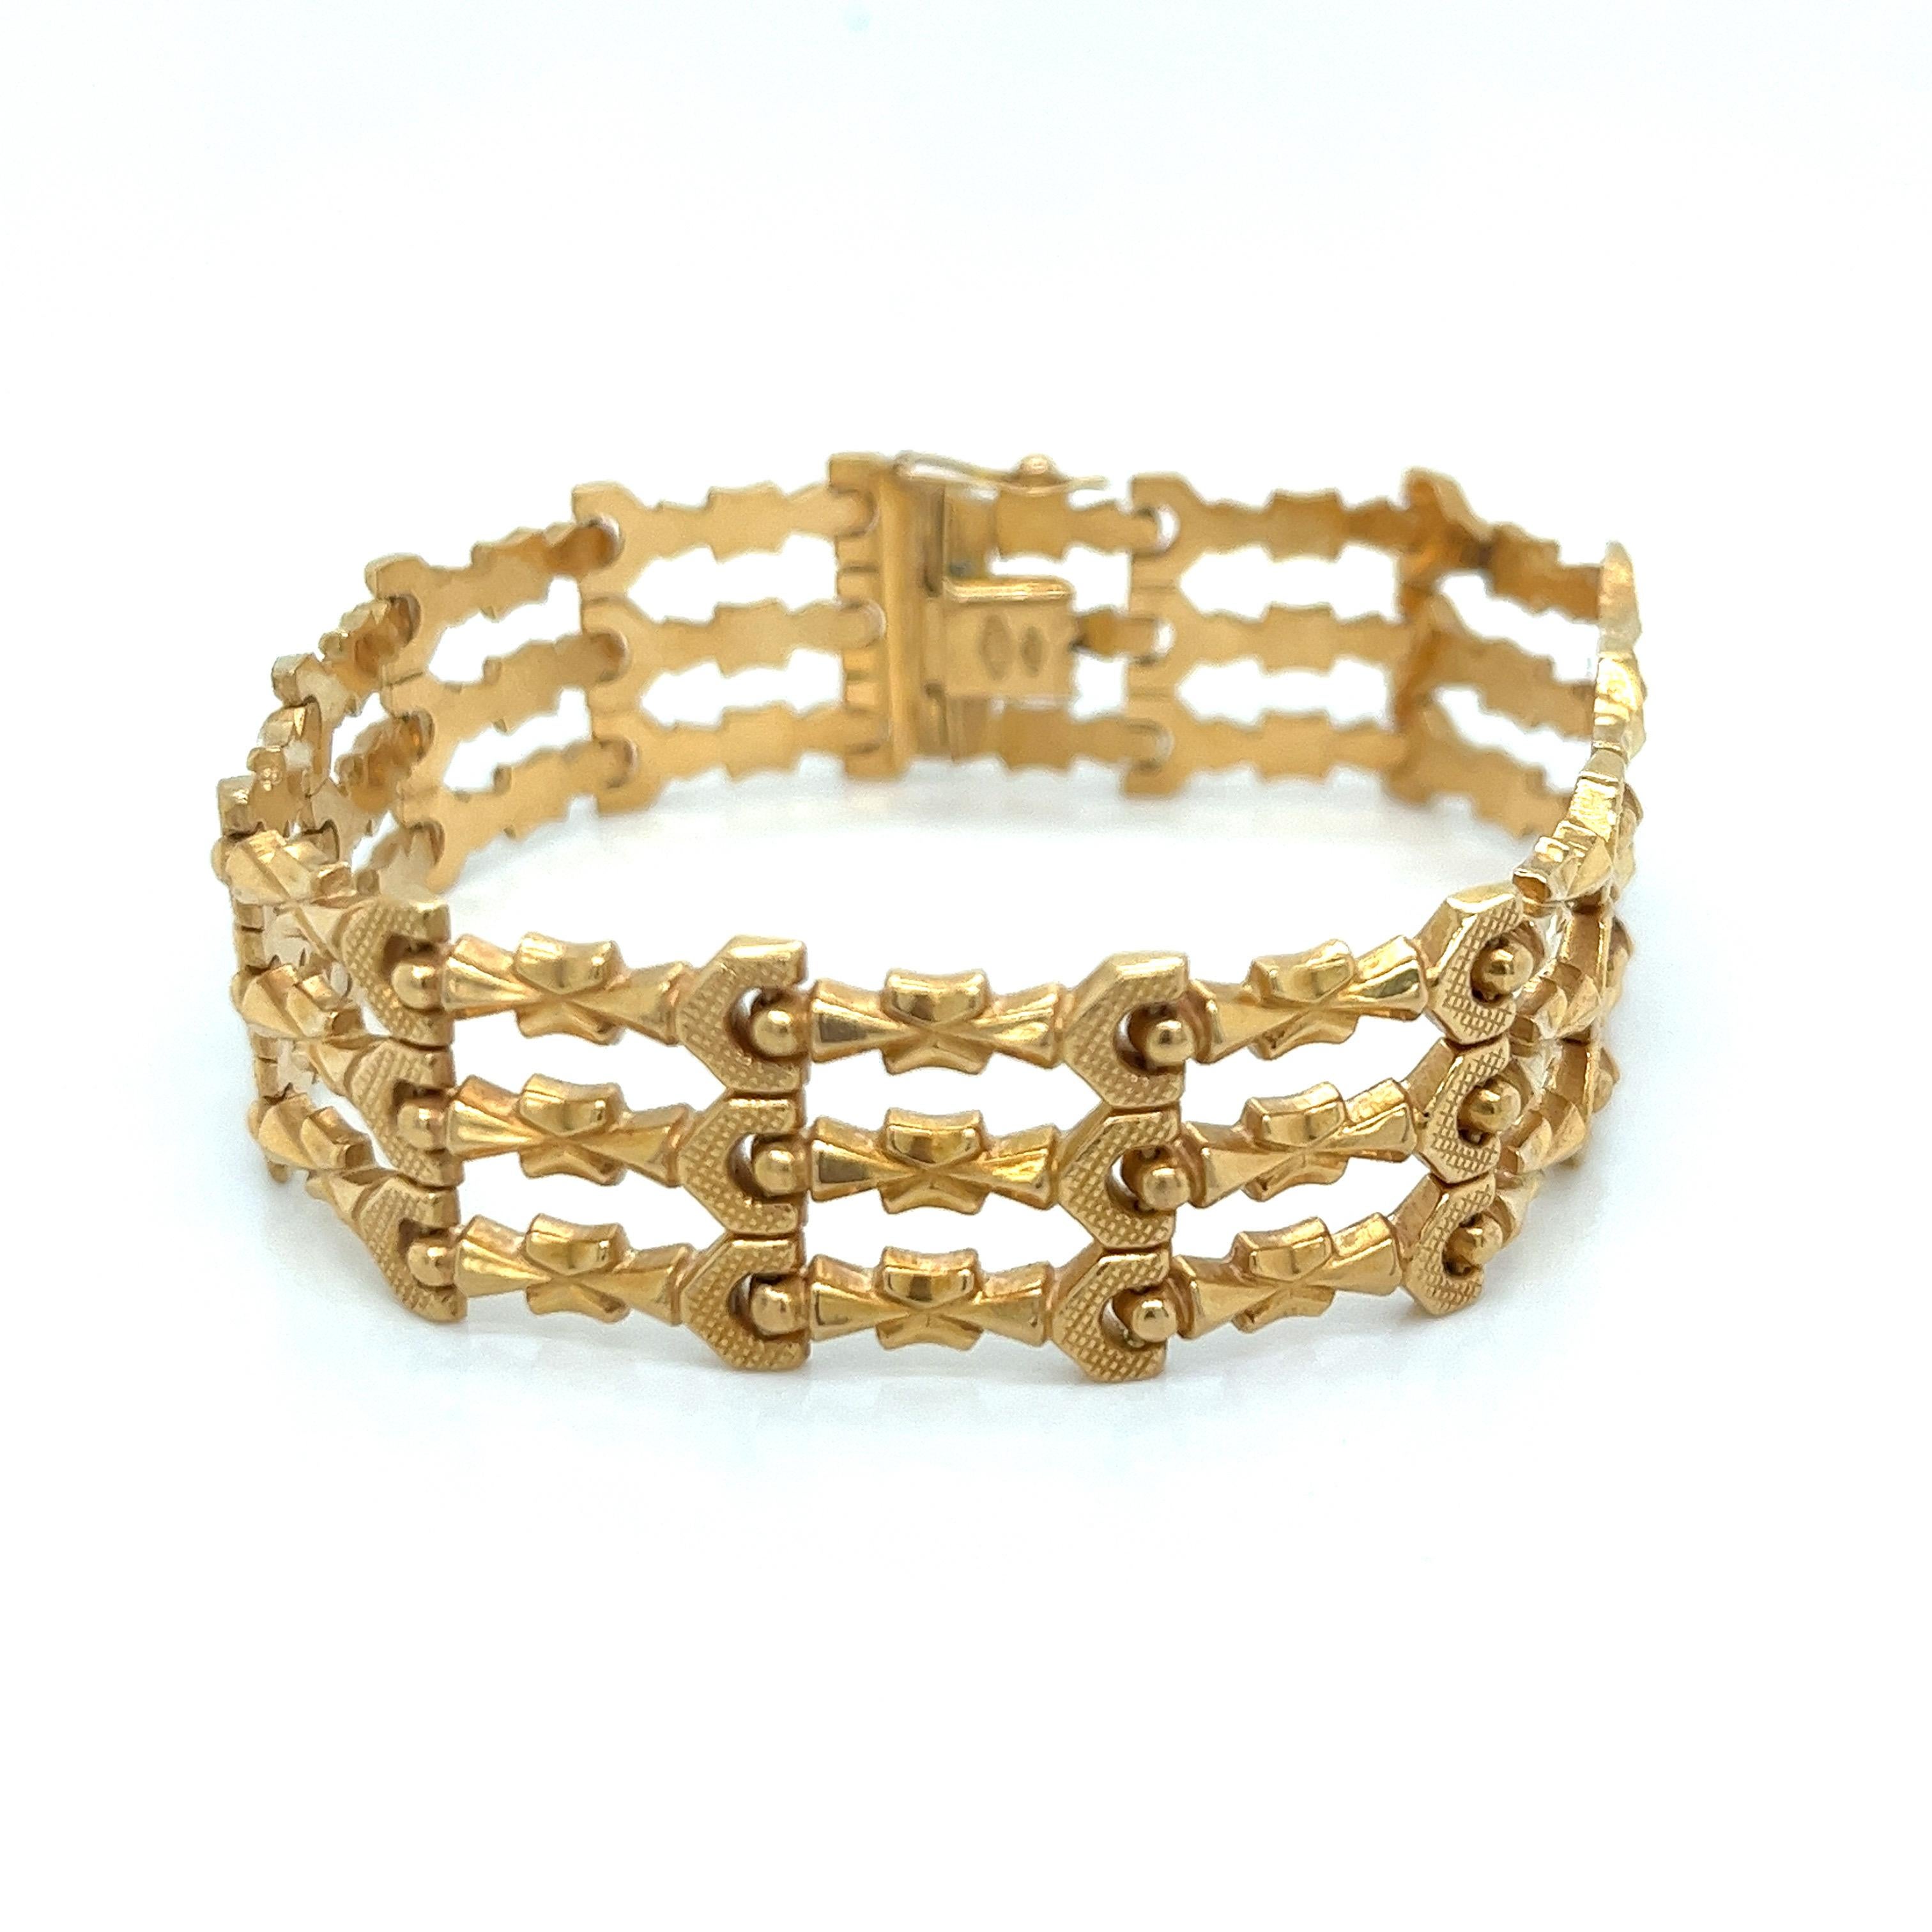 A stunning exemplar of mid-20th century jewelry artistry, this vintage bracelet from the 1940s-1950s era exudes timeless elegance and sophistication. Masterfully crafted in rich 18k yellow gold, verified by the 750 stamp, the design features a bold